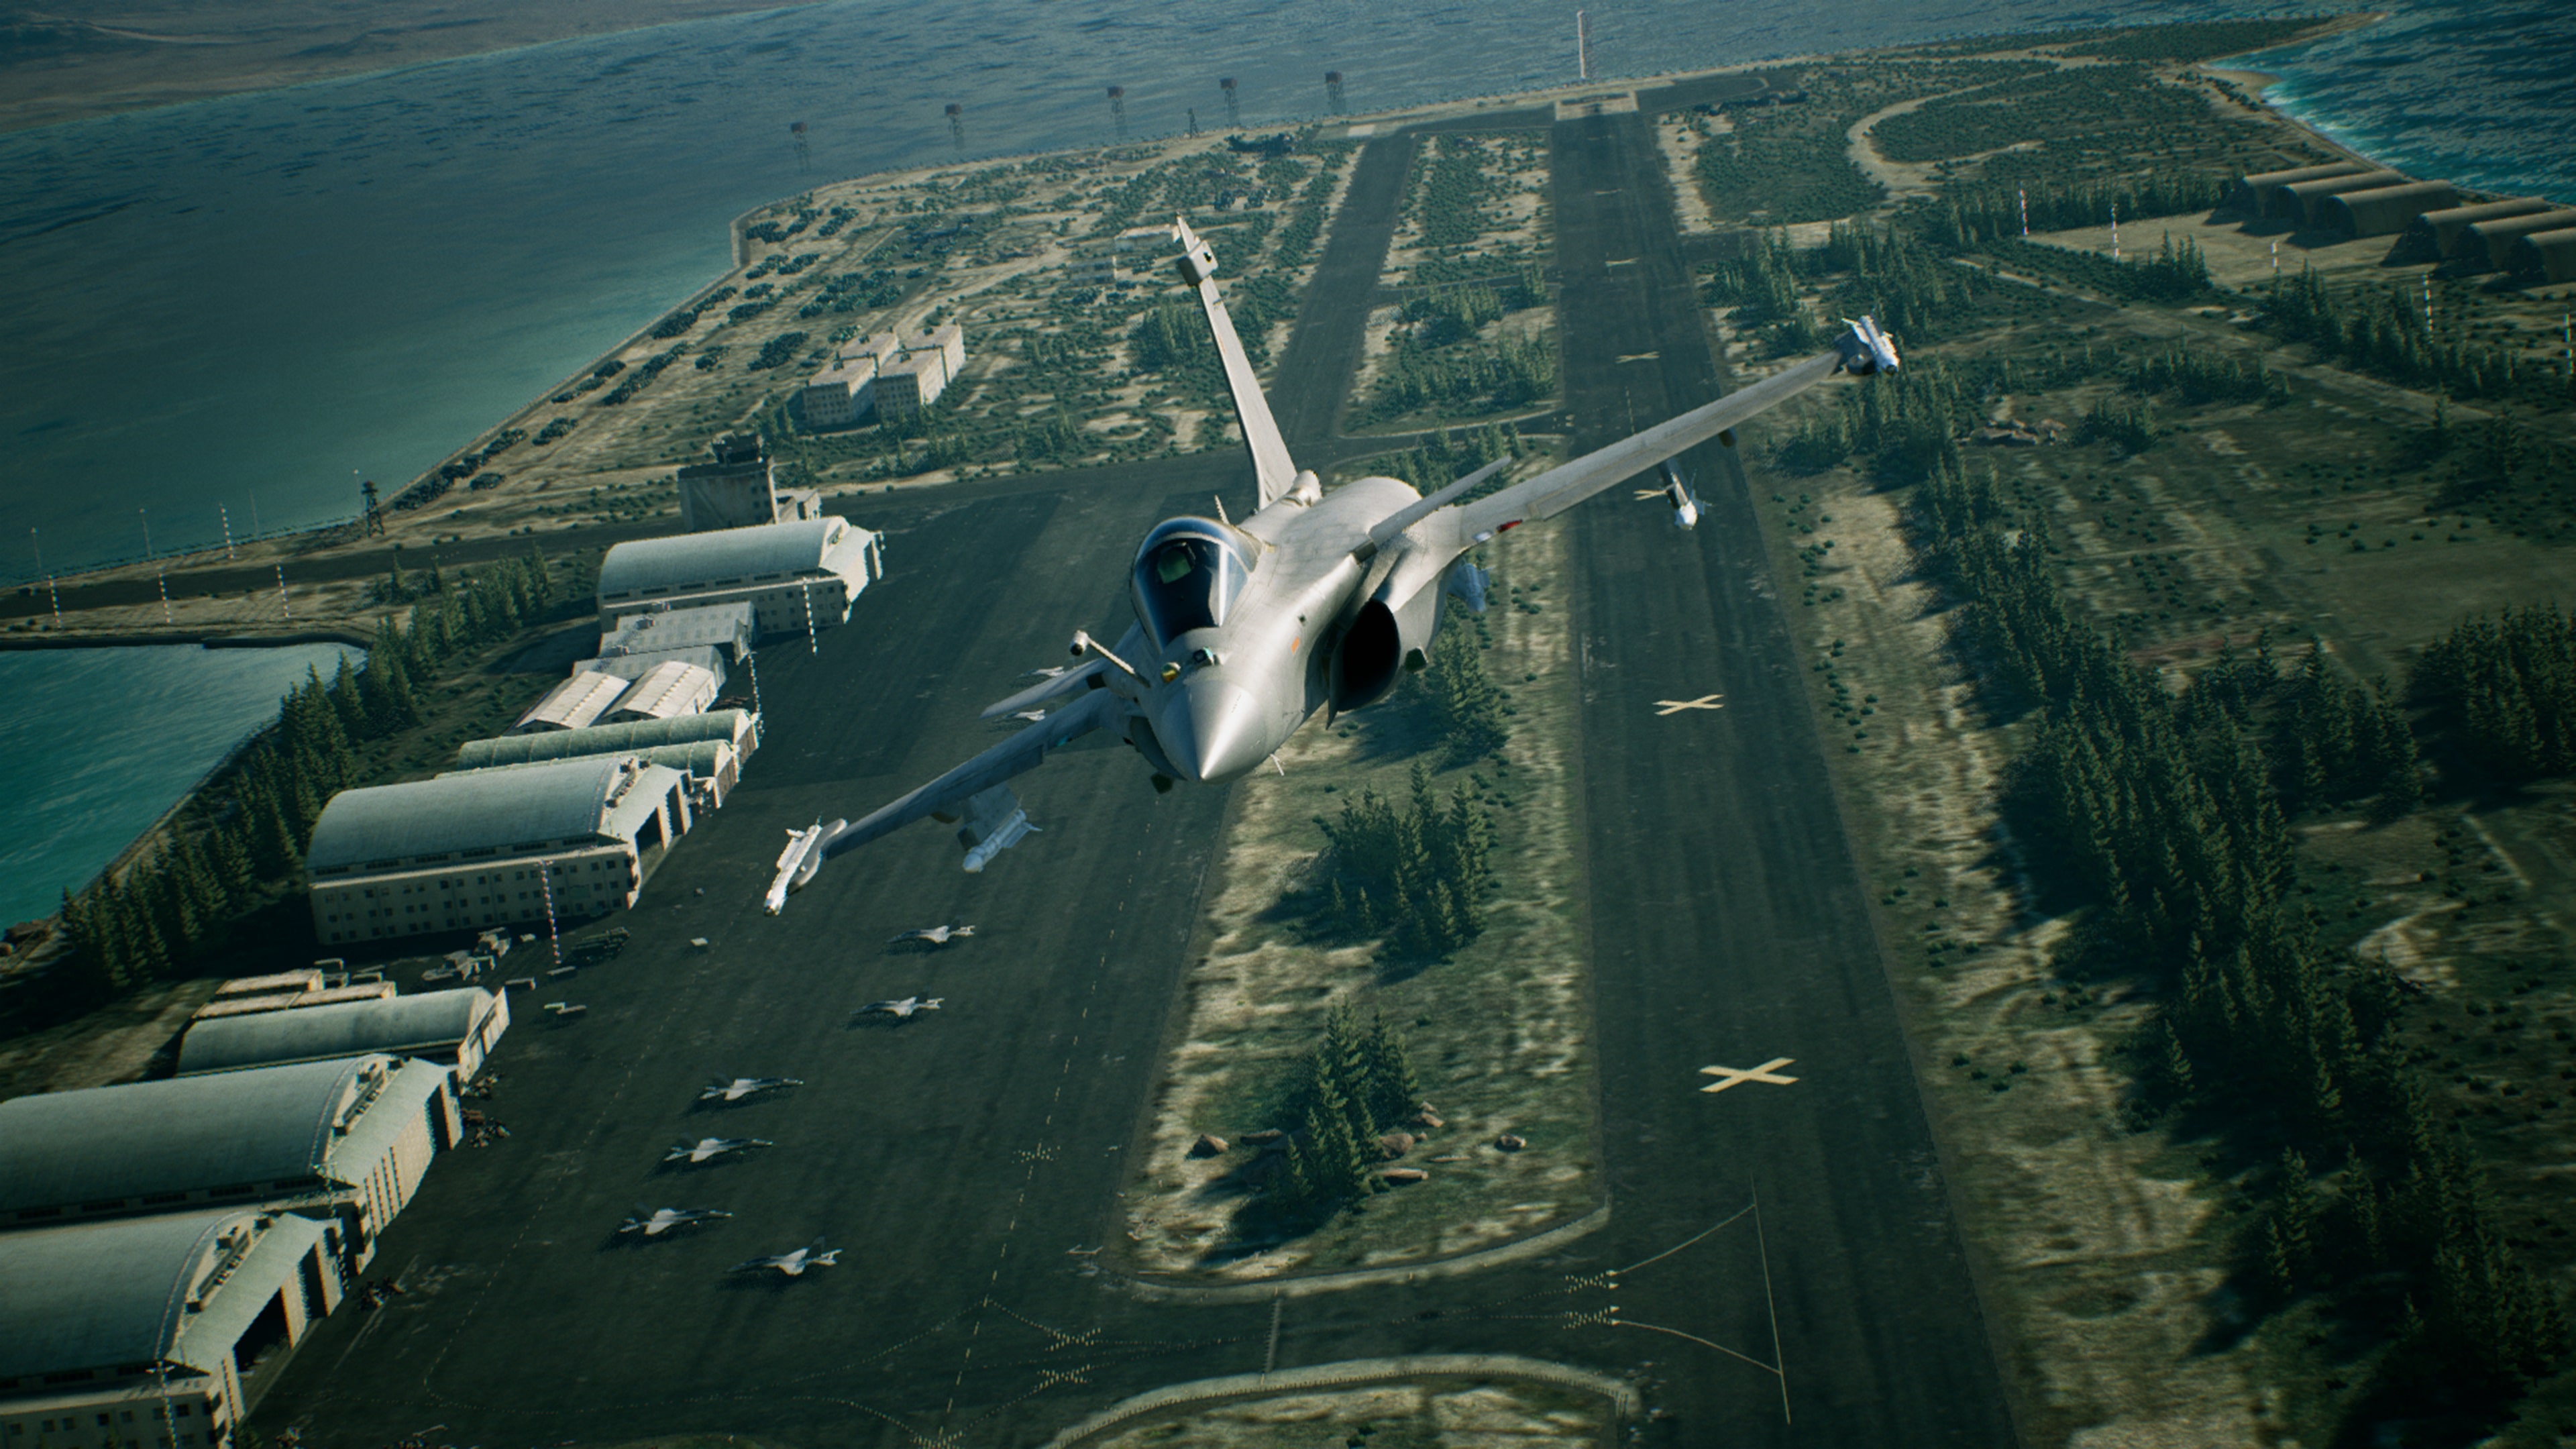 Buy Ace Combat 8 Other